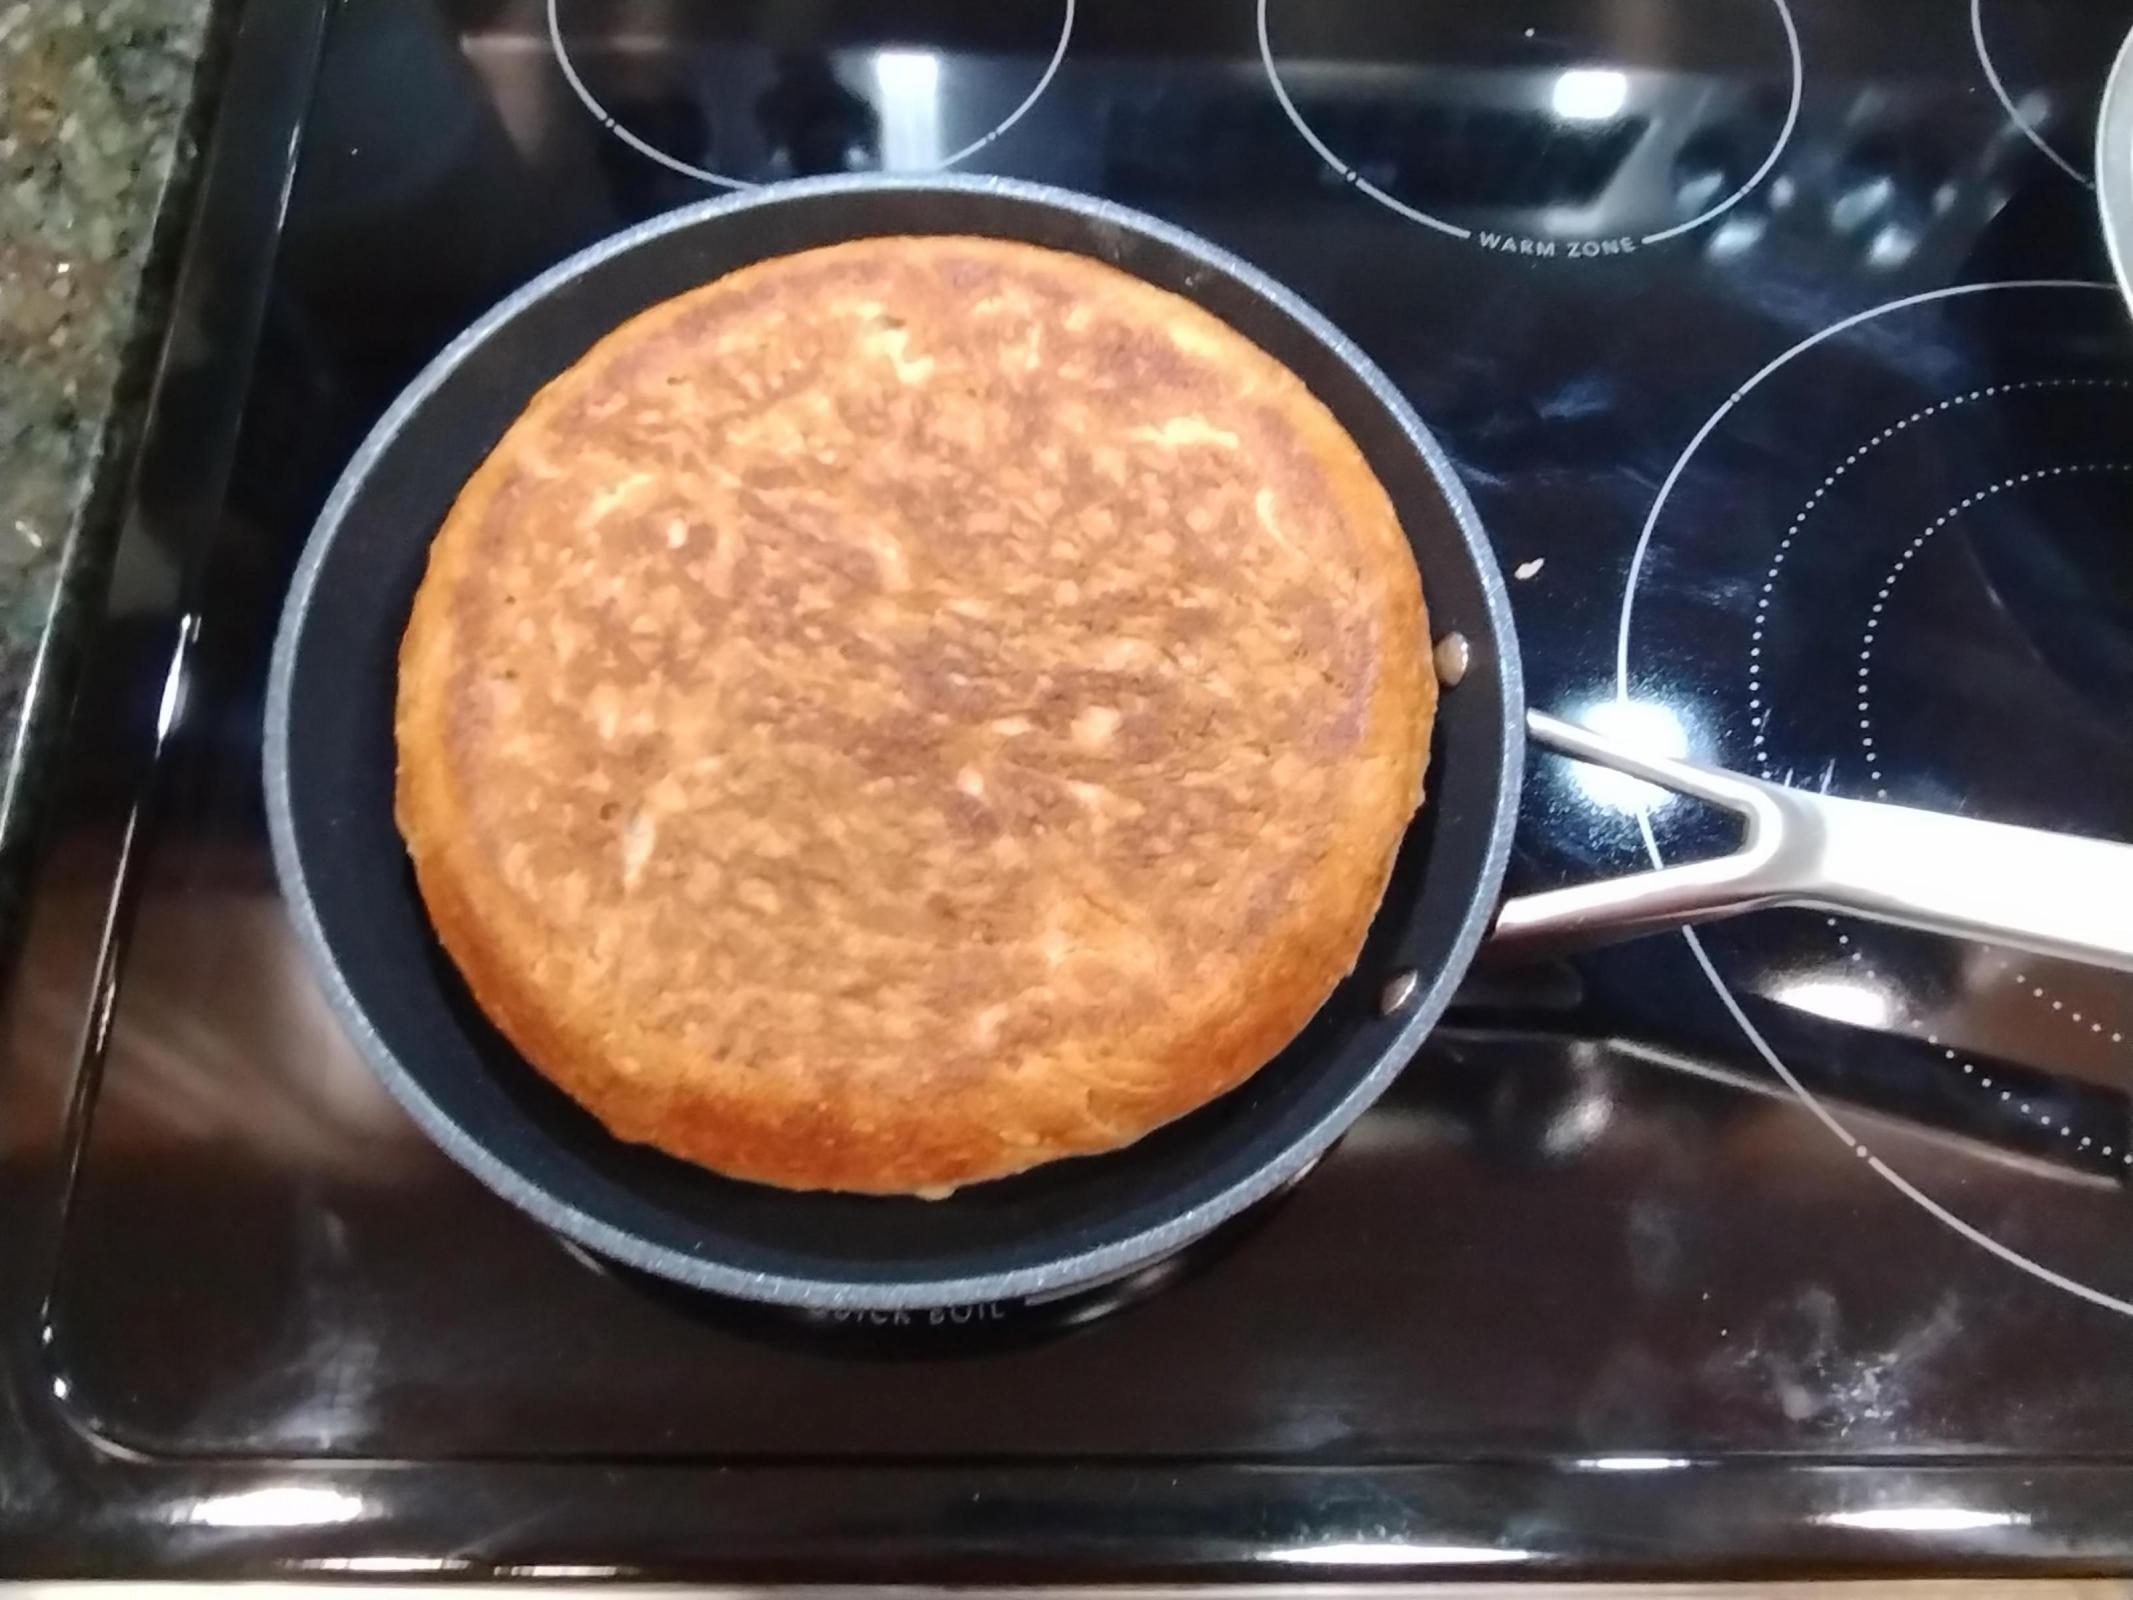 "Bottom", just after flipping. Continued to cook 15 min on low, lid off. 